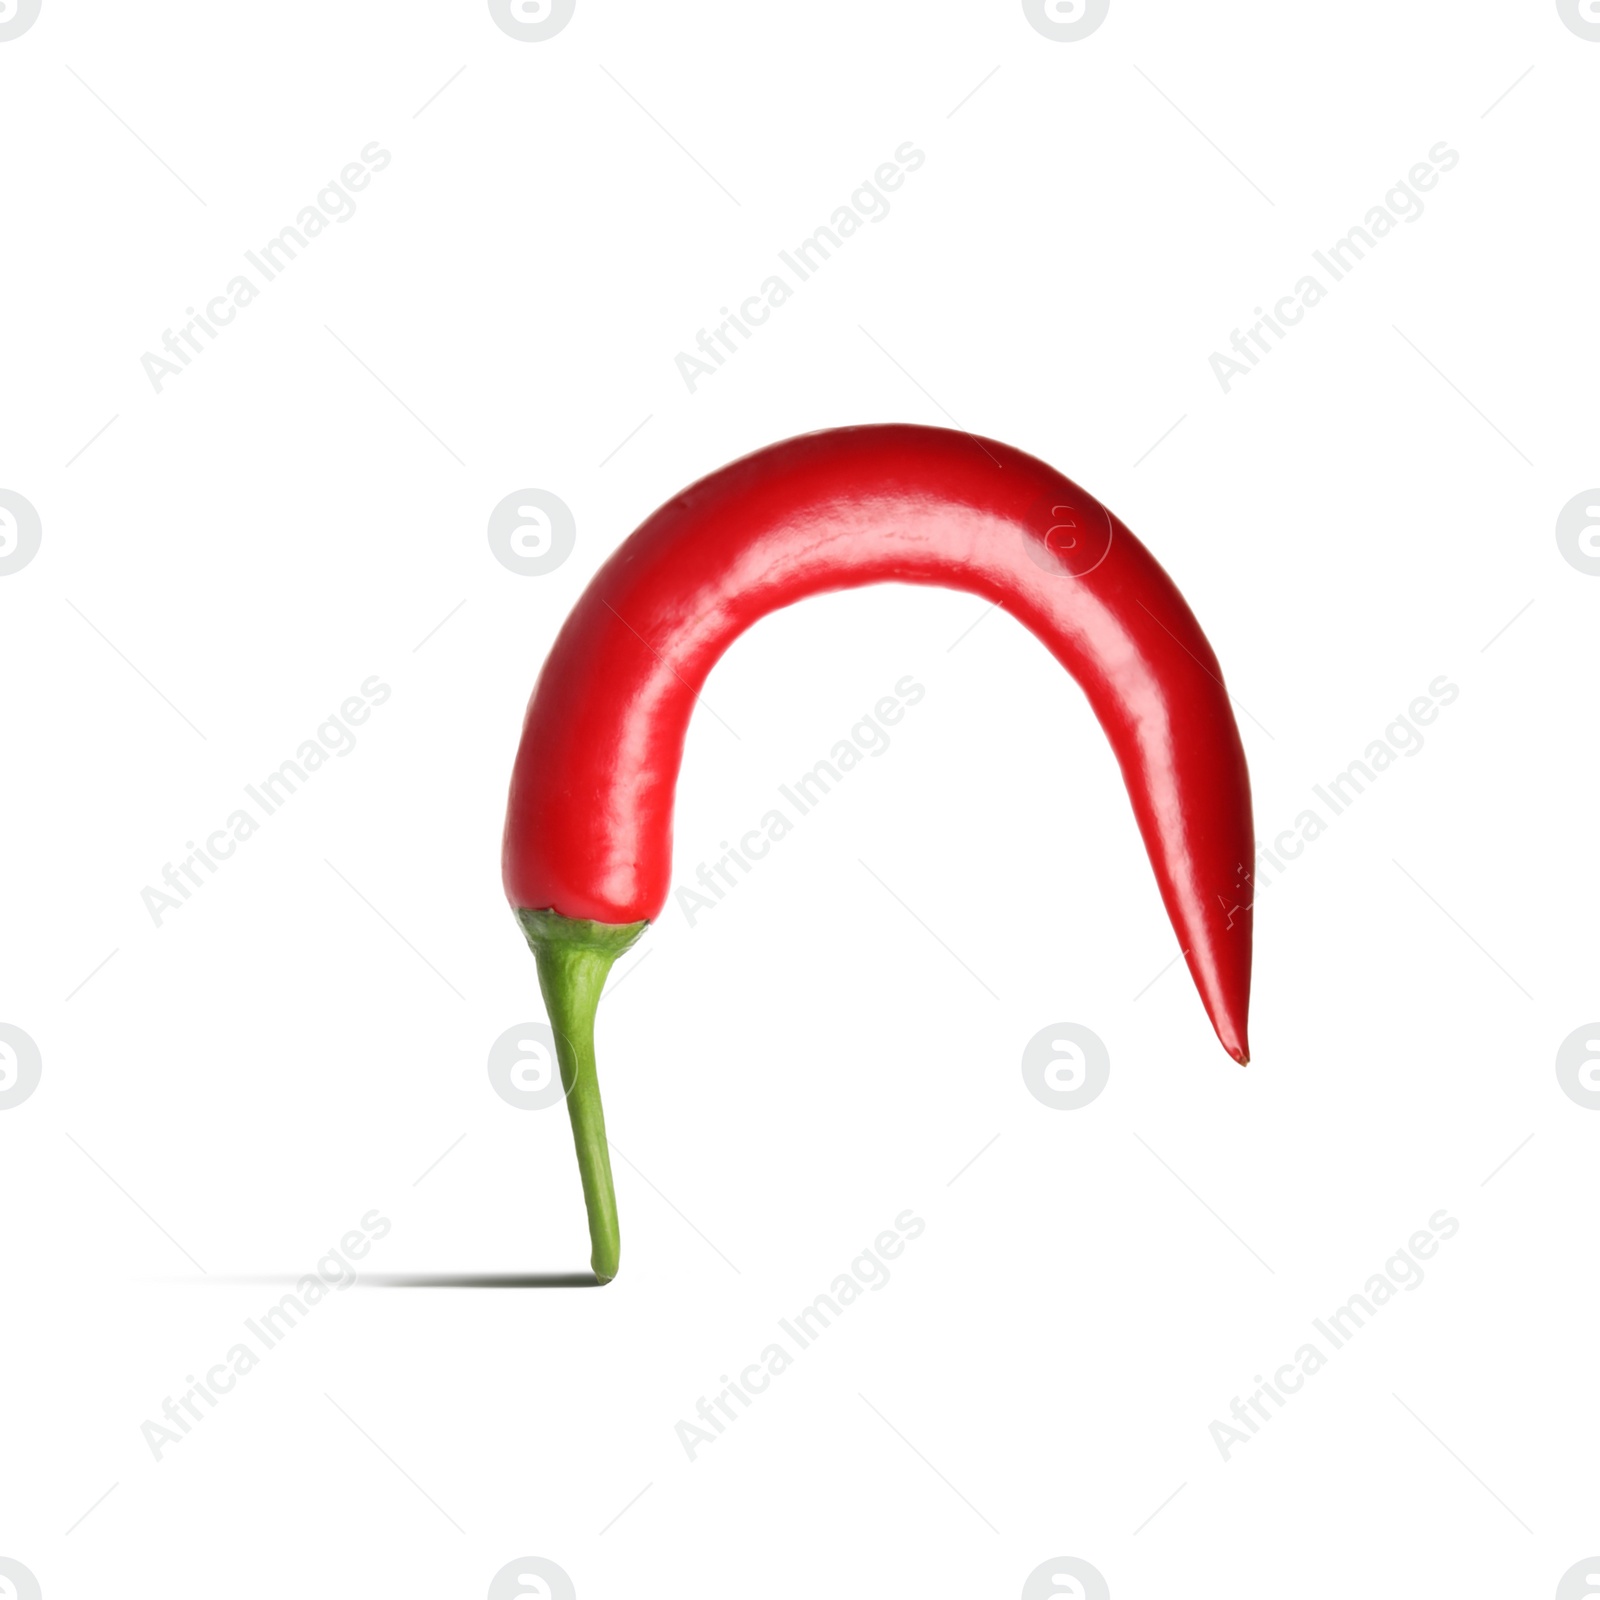 Image of Chili pepper symbolizing male sexual organ on white background. Potency problem